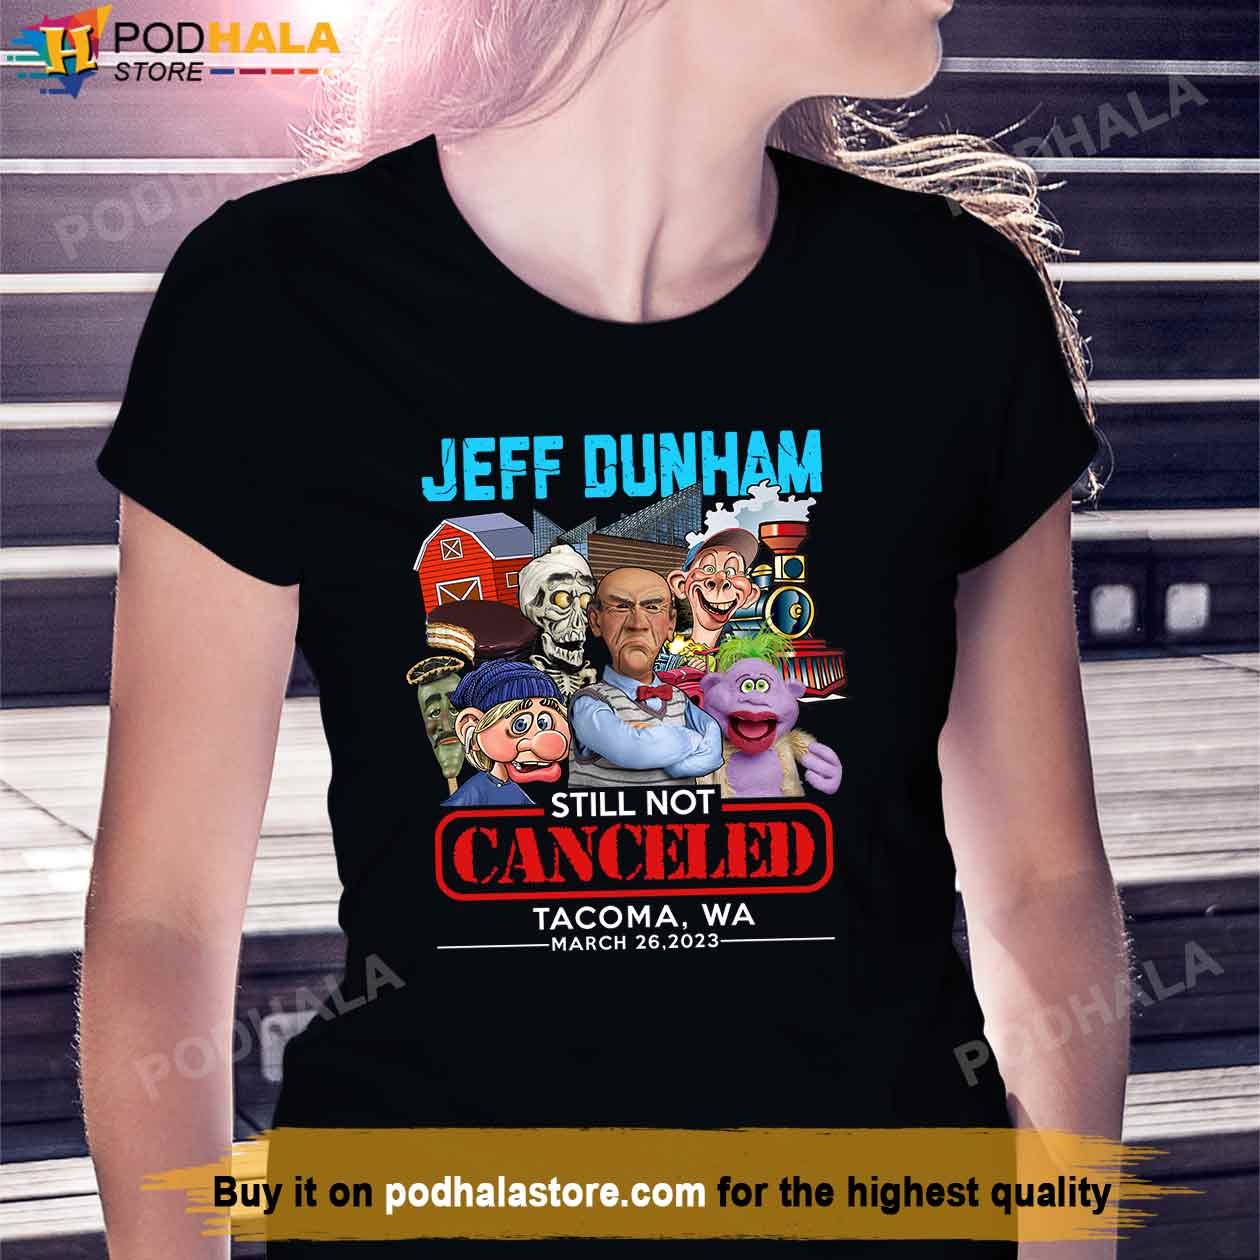 Jeff Dunham Tacoma, WA 26,2023) Shirt, Gift For Dunham Fans - Bring Your Ideas, Thoughts Imaginations Into Reality Today